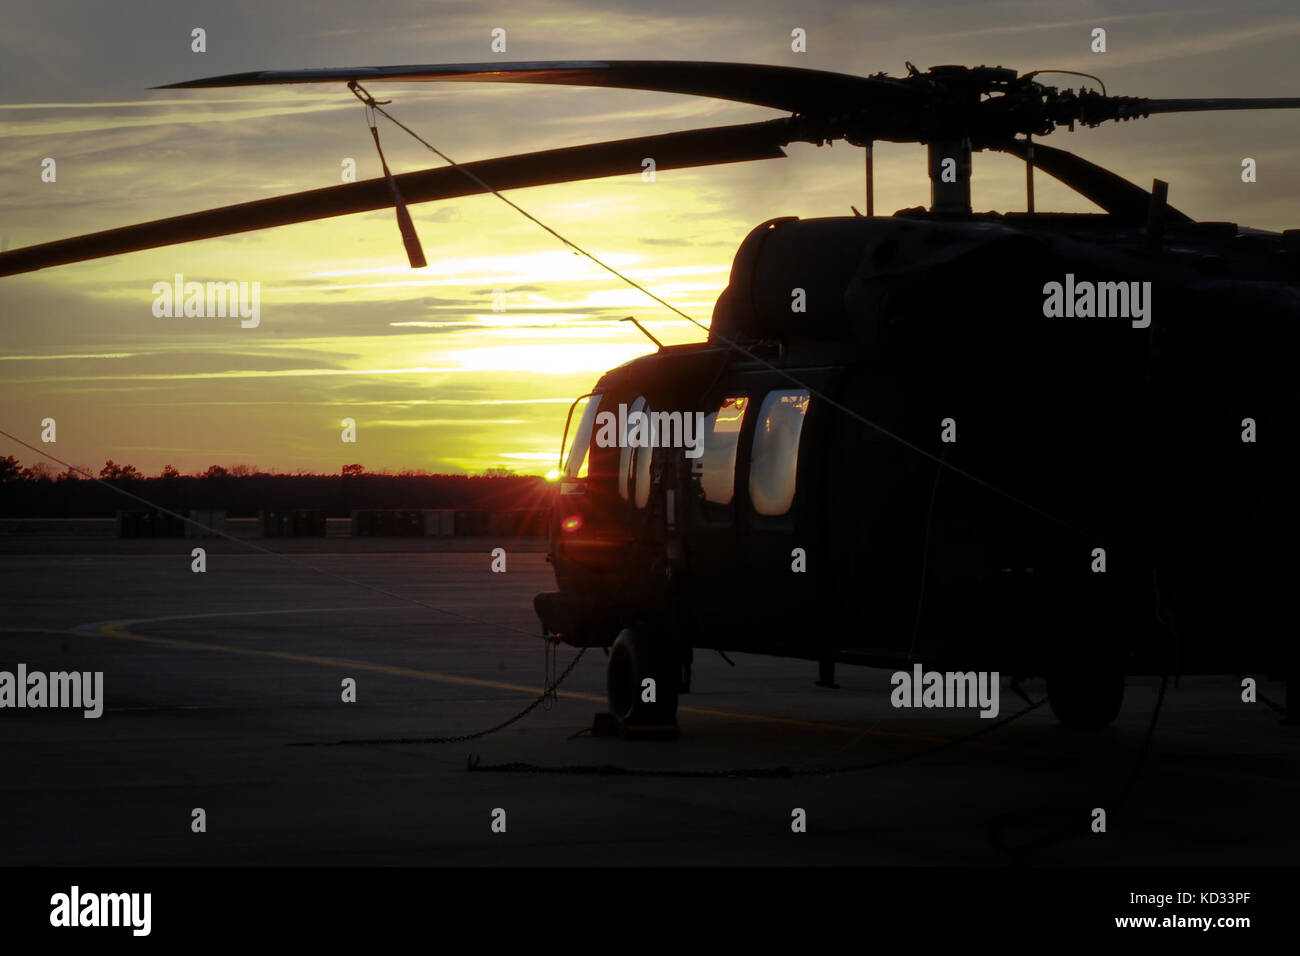 Aircrews have returned from their training missions and UH-60 Black Hawks are secured on the flight line as the sun begins to set at the end of the training day at McEntire Joint National Guard Base, in Eastover, S.C. on Jan. 10, 2015. (U.S. Army National Guard photo by Sgt. Brian Calhoun/Released) Stock Photo